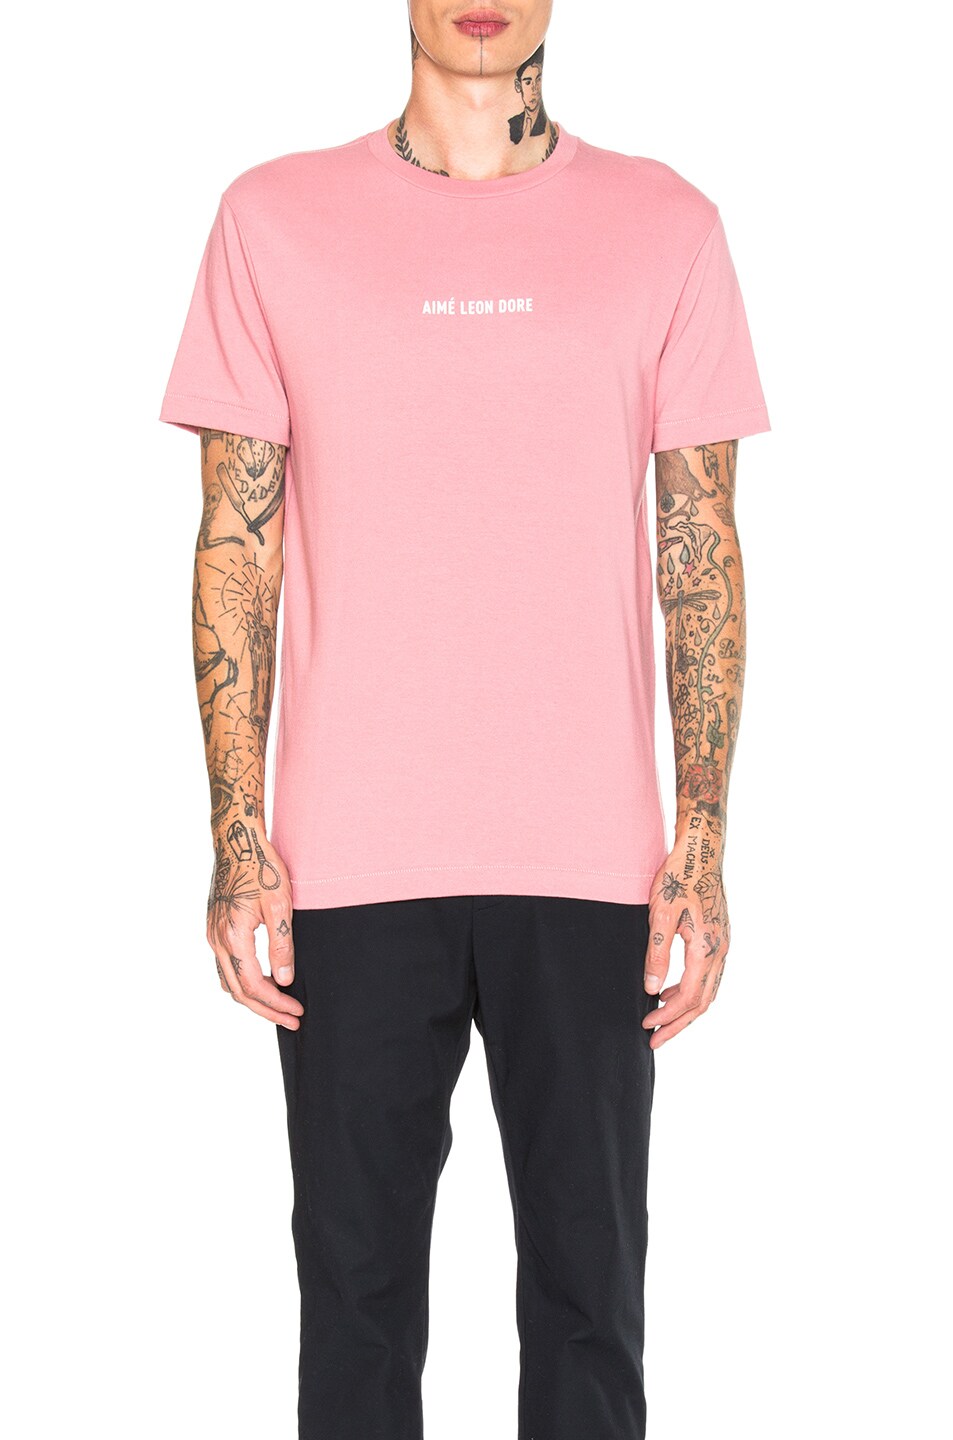 Image 1 of Aime Leon Dore Logo Tee in Dusty Pink